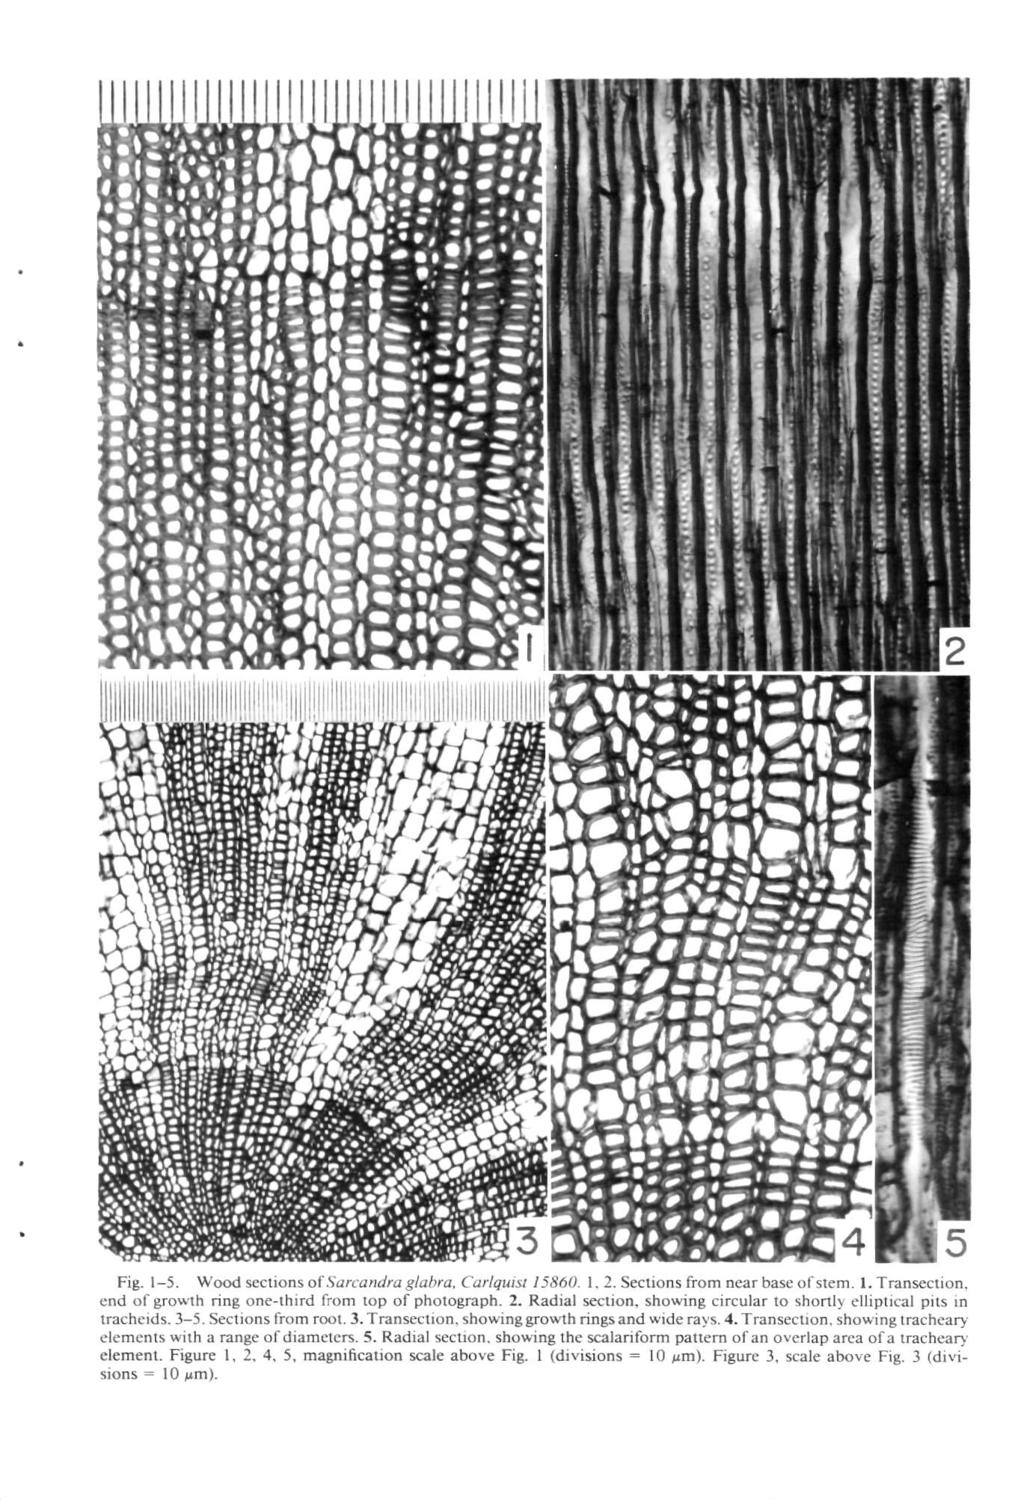 Fig. 1-5. Wood sections of Sarcandra glabra, Carlquist 15860. 1. 2. Sections from near base of stem. 1. Transection, end of growth ring one-third from top of photograph. 2. Radial section, showing circular to shortly elliptical pits in tracheids.